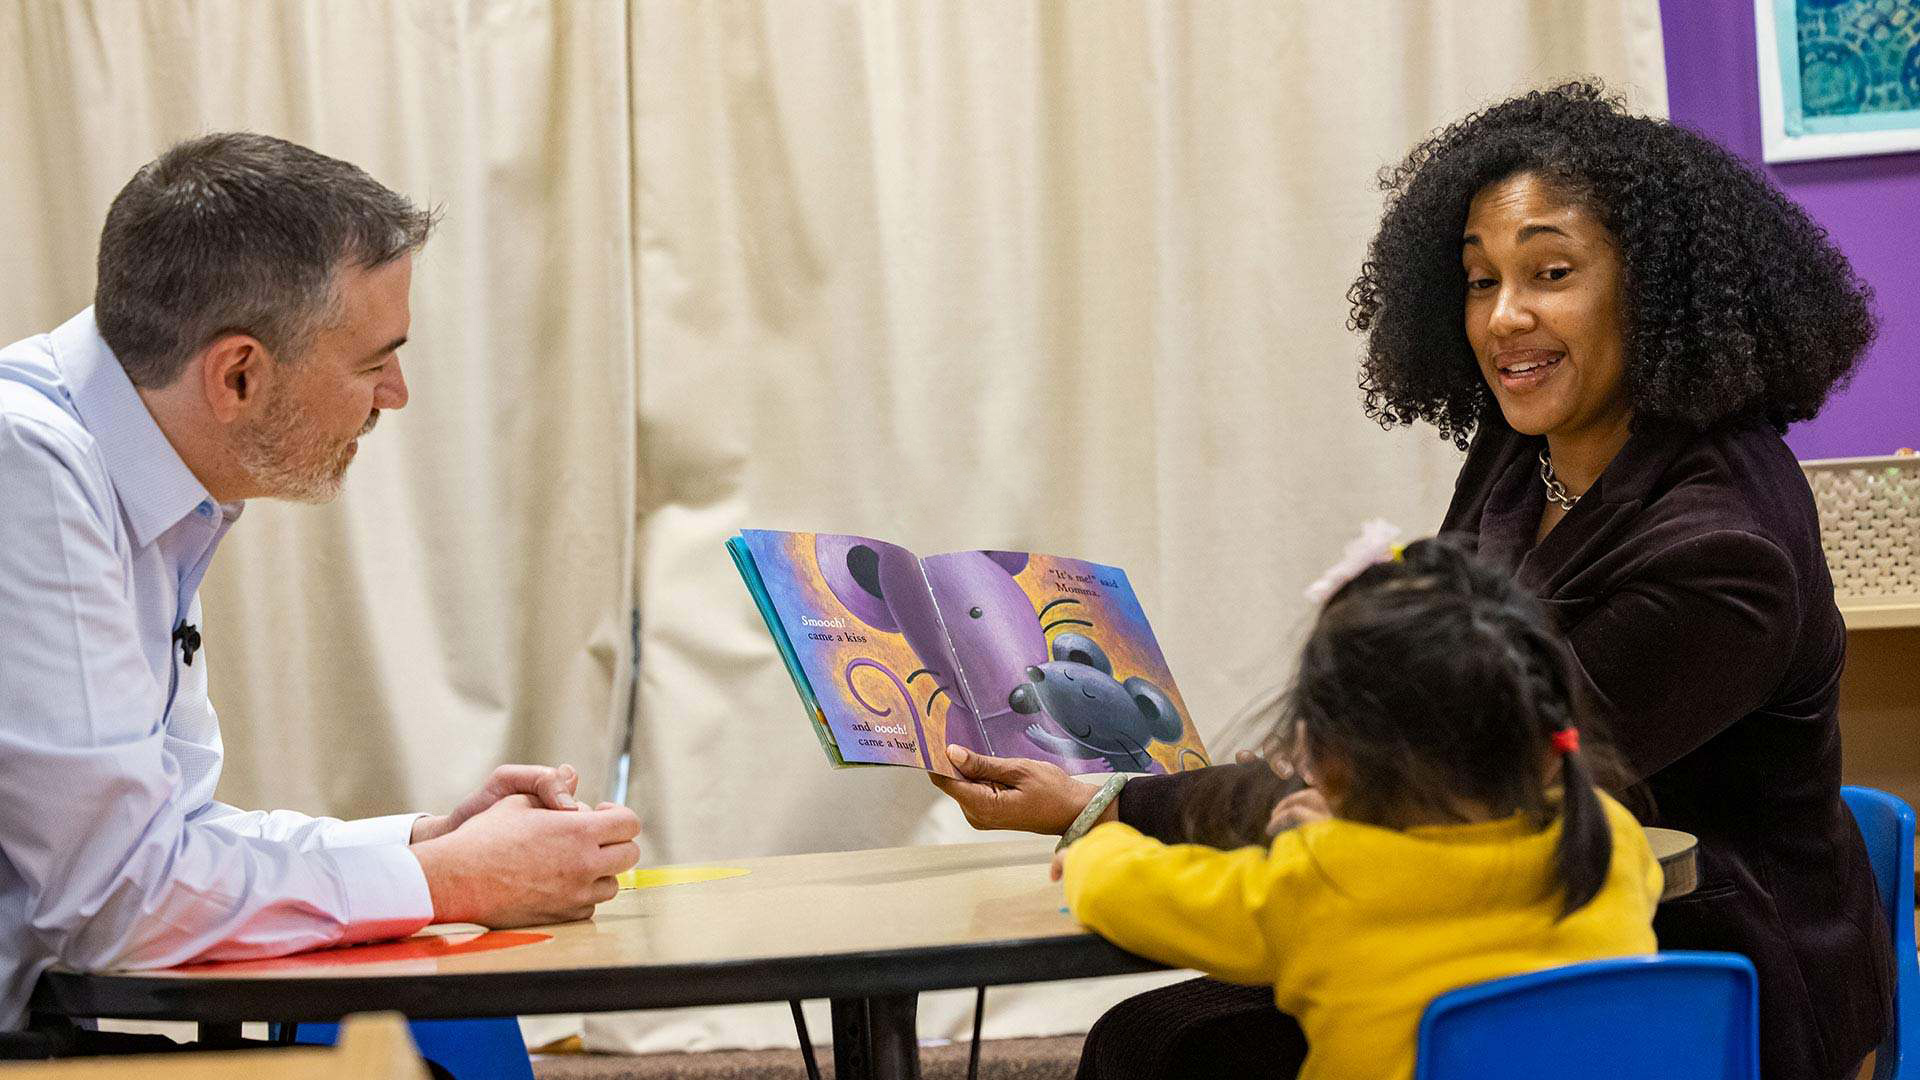 Thanks to the University of Maryland’s Grand Challenges Grant Program, MILE is taking on one of humanity’s grand challenges by working with parents and community members to help children develop into strong readers.